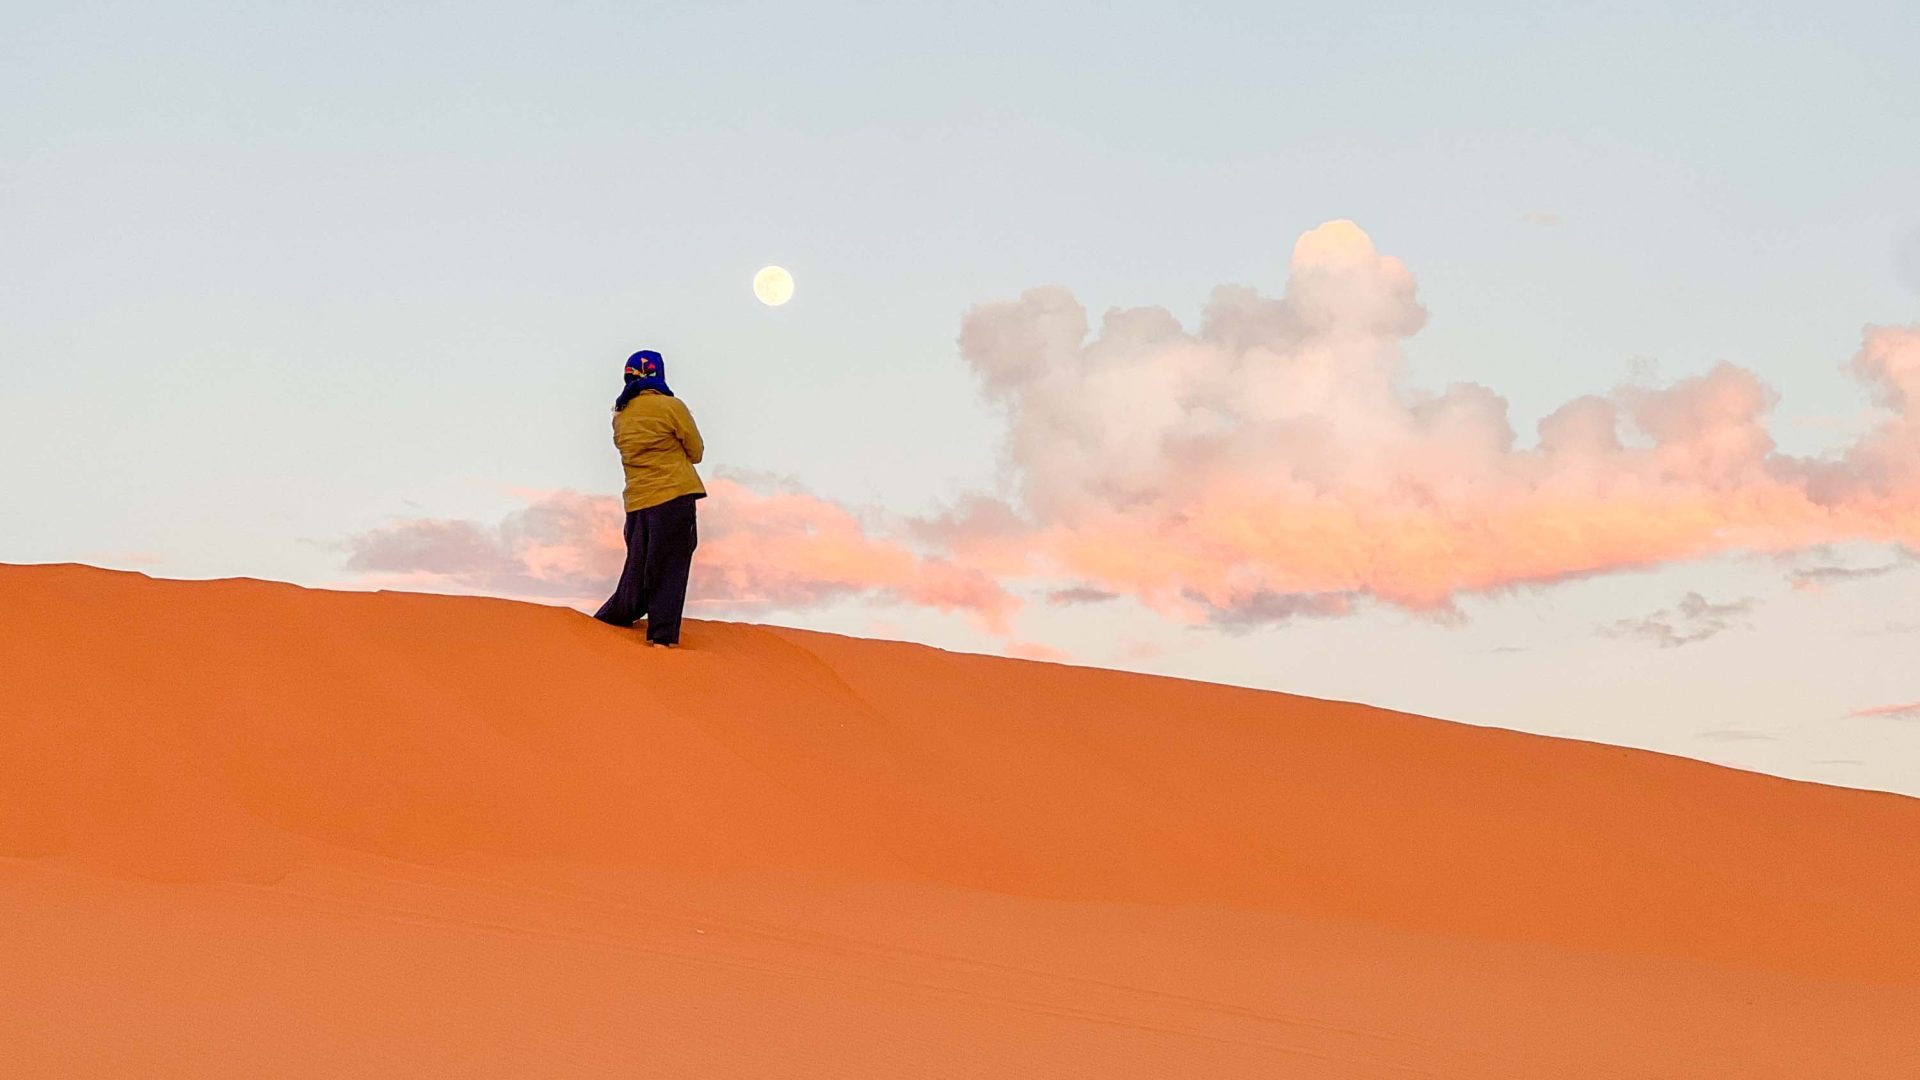 A solitary figure stands in the desert.